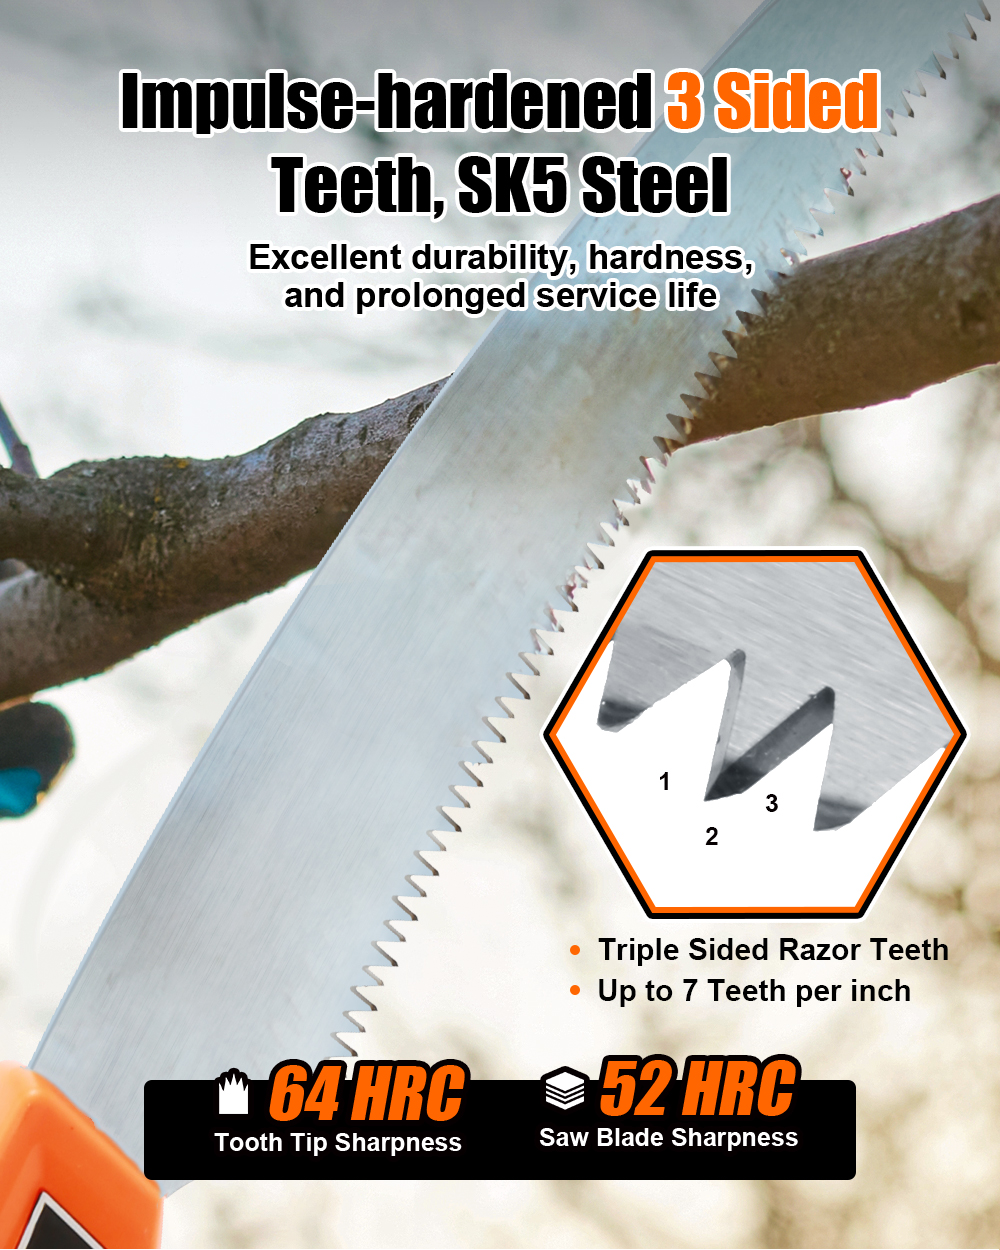 TOPSHAK-TS-DS4-350mm-SK5-Steel-Sharp-Blade-3-Sided-Razor-Teeth-Curved-Saw-for-Woodworking-Maintenanc-1933233-3